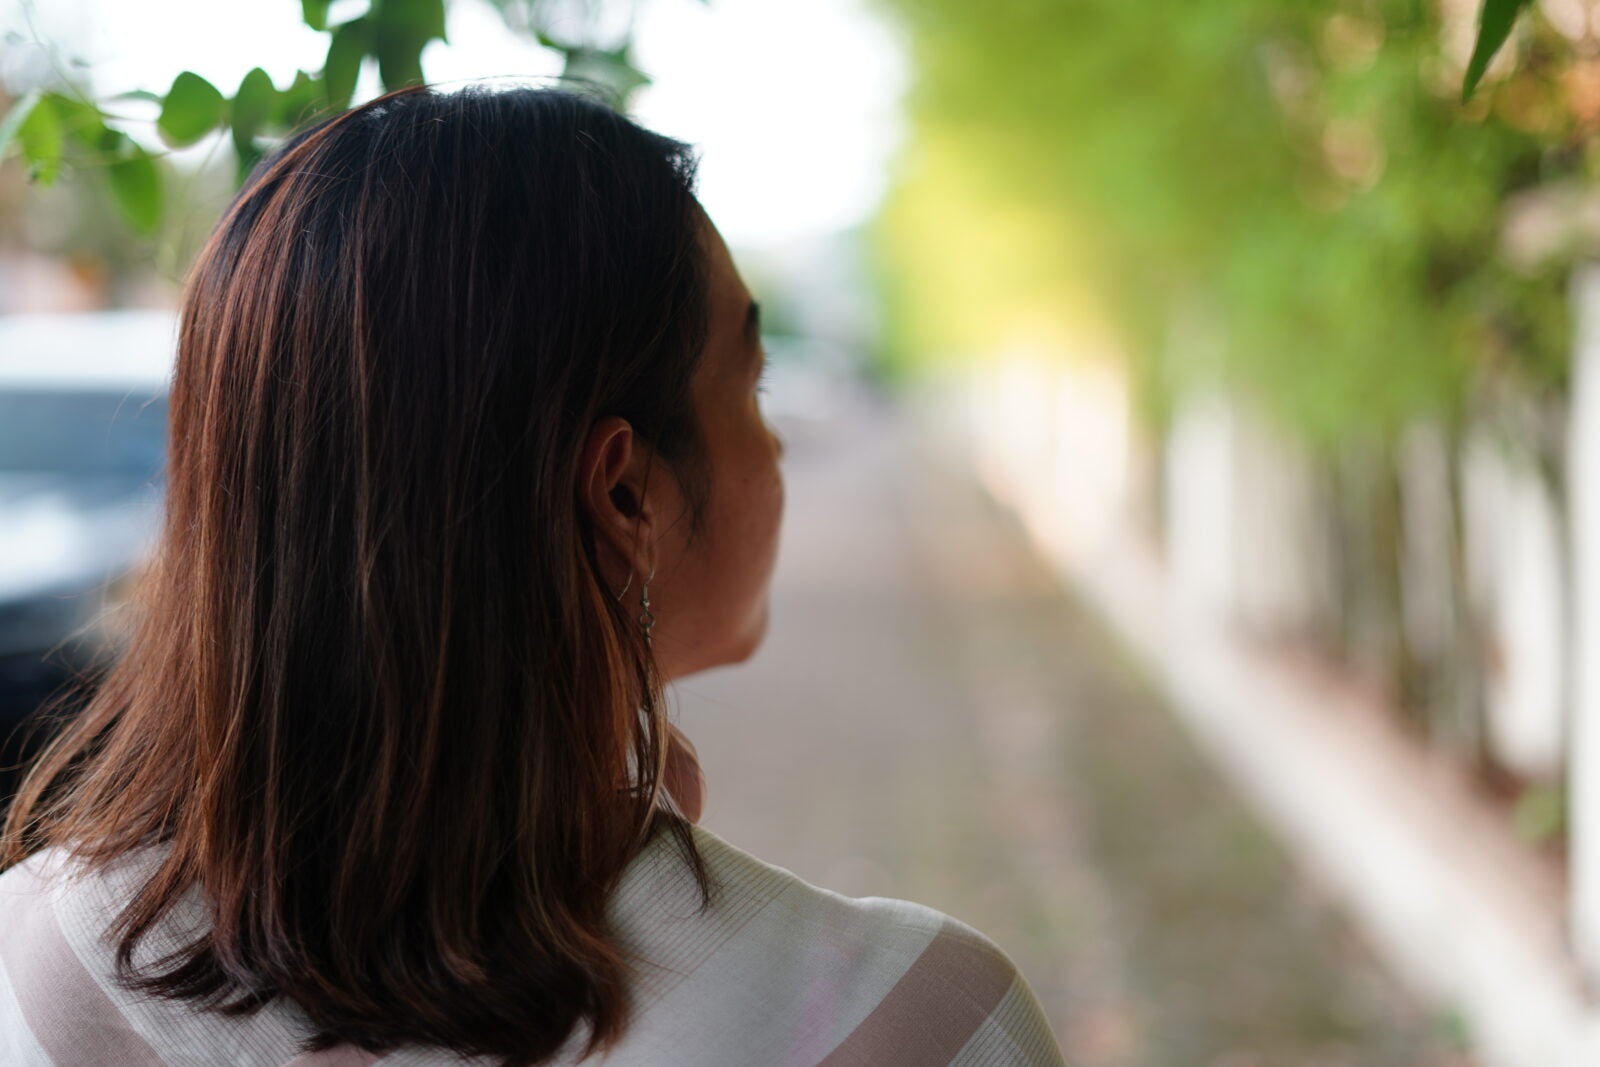 Medium close up of a woman with brown hair looking to her side with the background blurred.